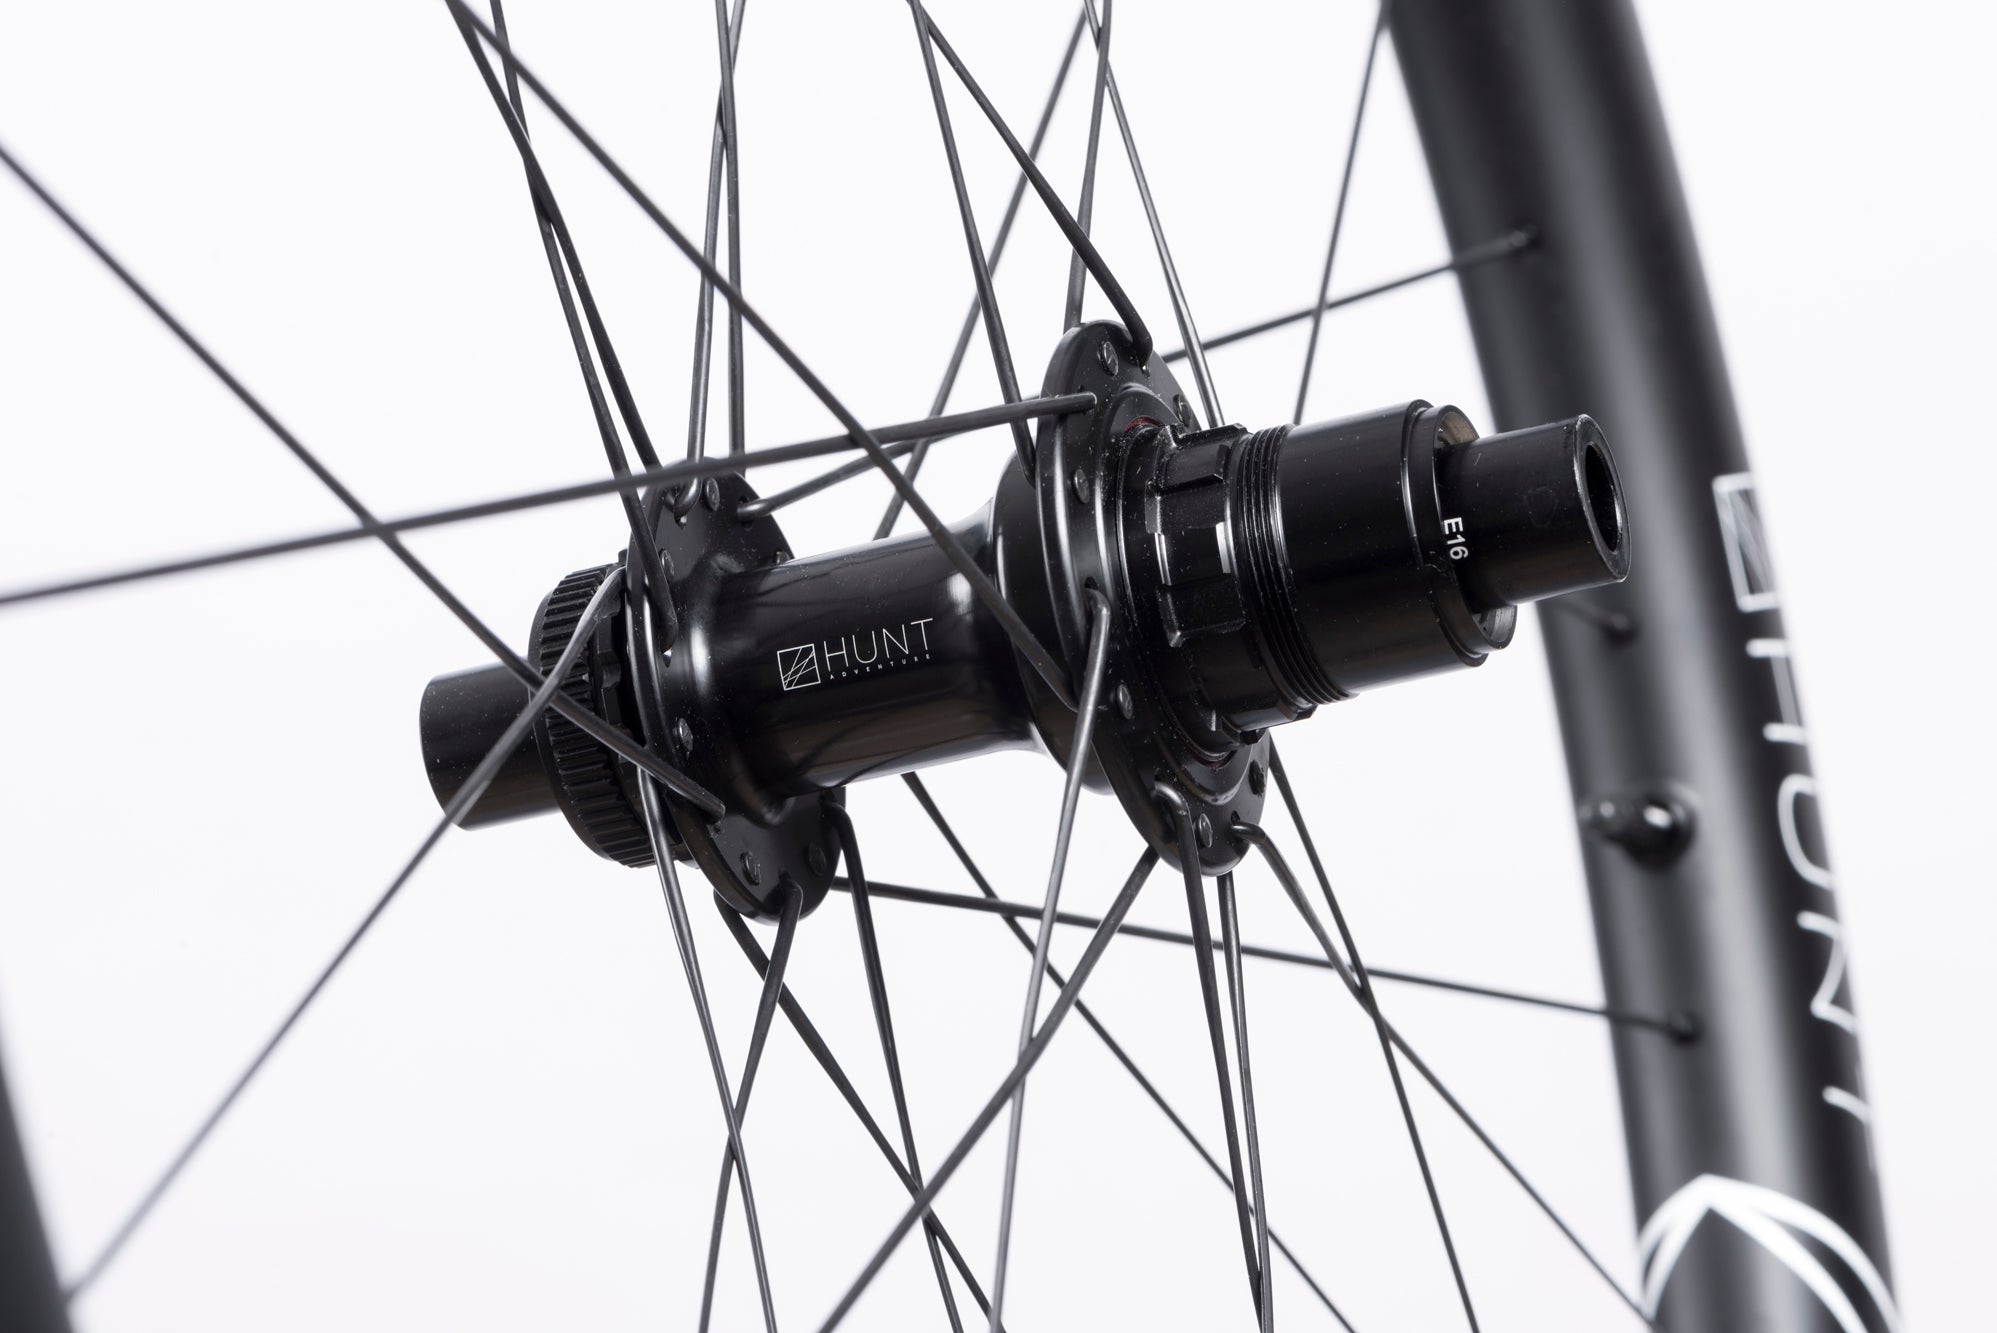 <h1>FREEHUB BODY</h1><i>New <strong>H_Ratchet</strong> double-sided system (with two floating ratchet rings), with a 40t ratchet ring resulting in just 9˚ engagement. The freehub benefits from H_Ceramik anti-bite coating to ensure maximum durability.</i>